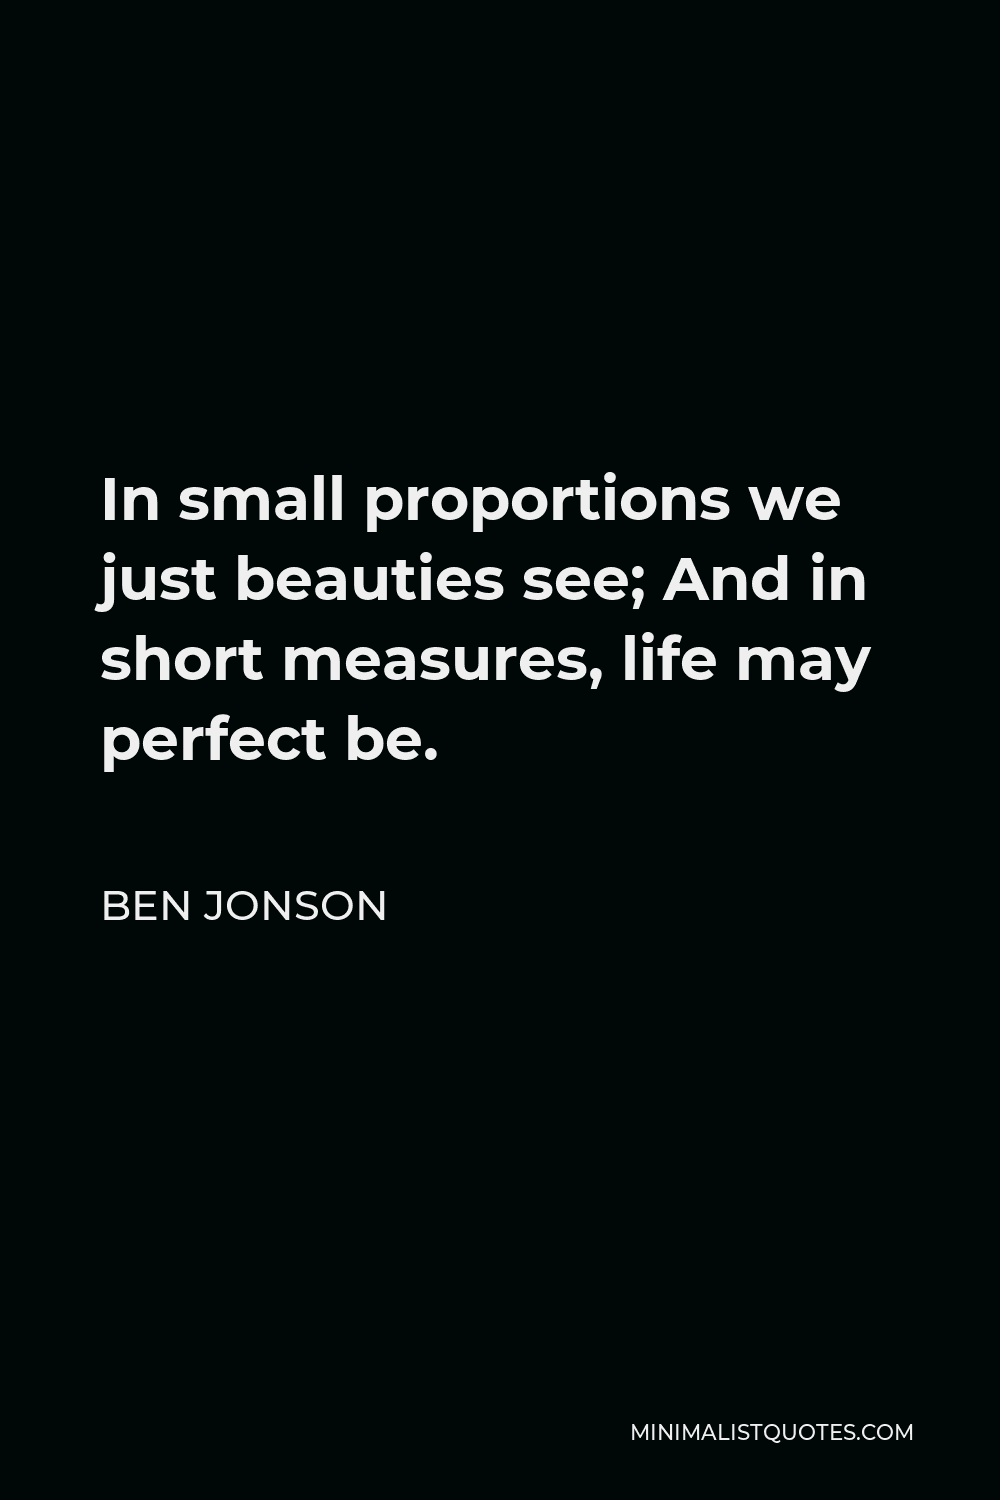 Ben Jonson Quote - In small proportions we just beauties see; And in short measures, life may perfect be.